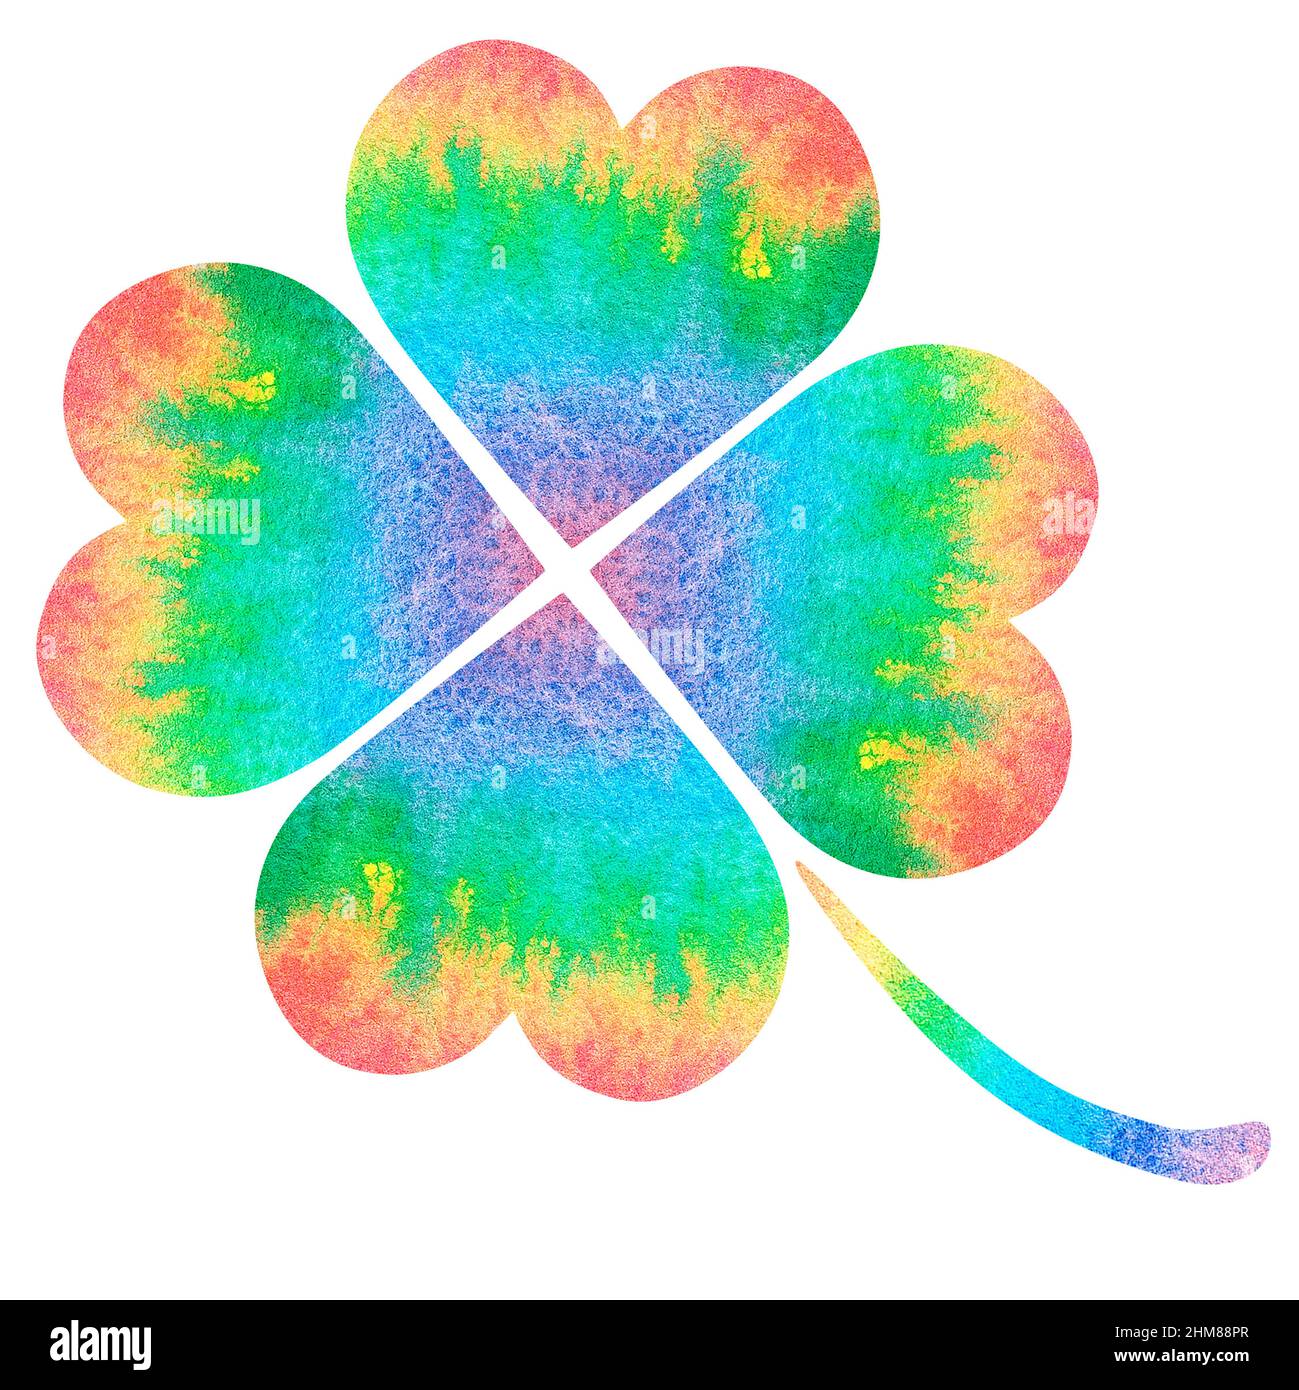 Rainbow four leaf clover. St. Patrick's Day. Watercolor illustration. Isolated on a white background. For your design. Stock Photo